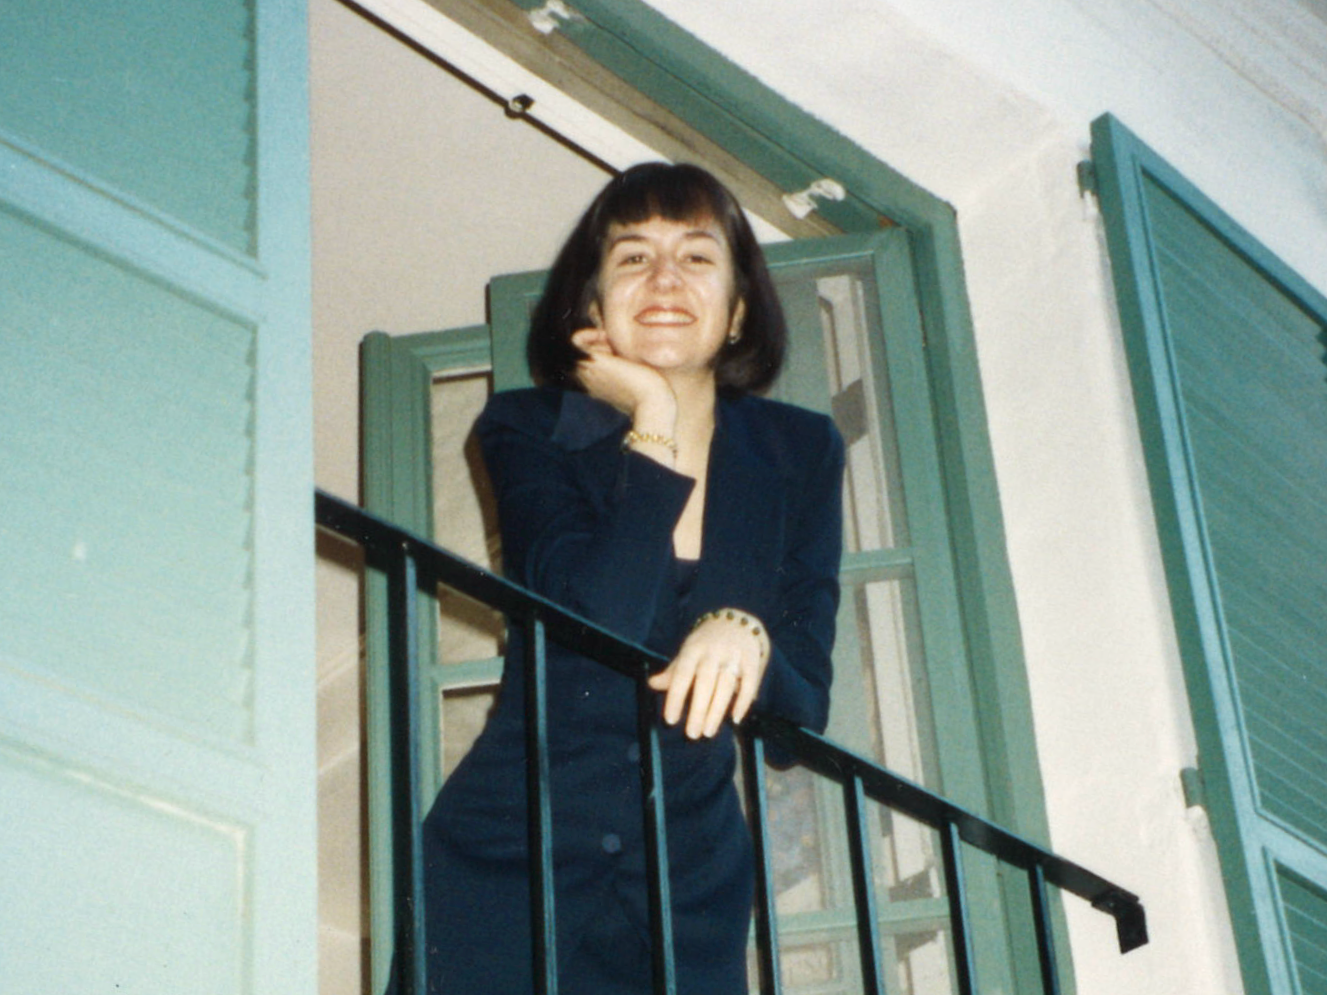 Jolene Hubbs '99, scholarship creator, standing on a balcony at Scripps in the early 1990s.